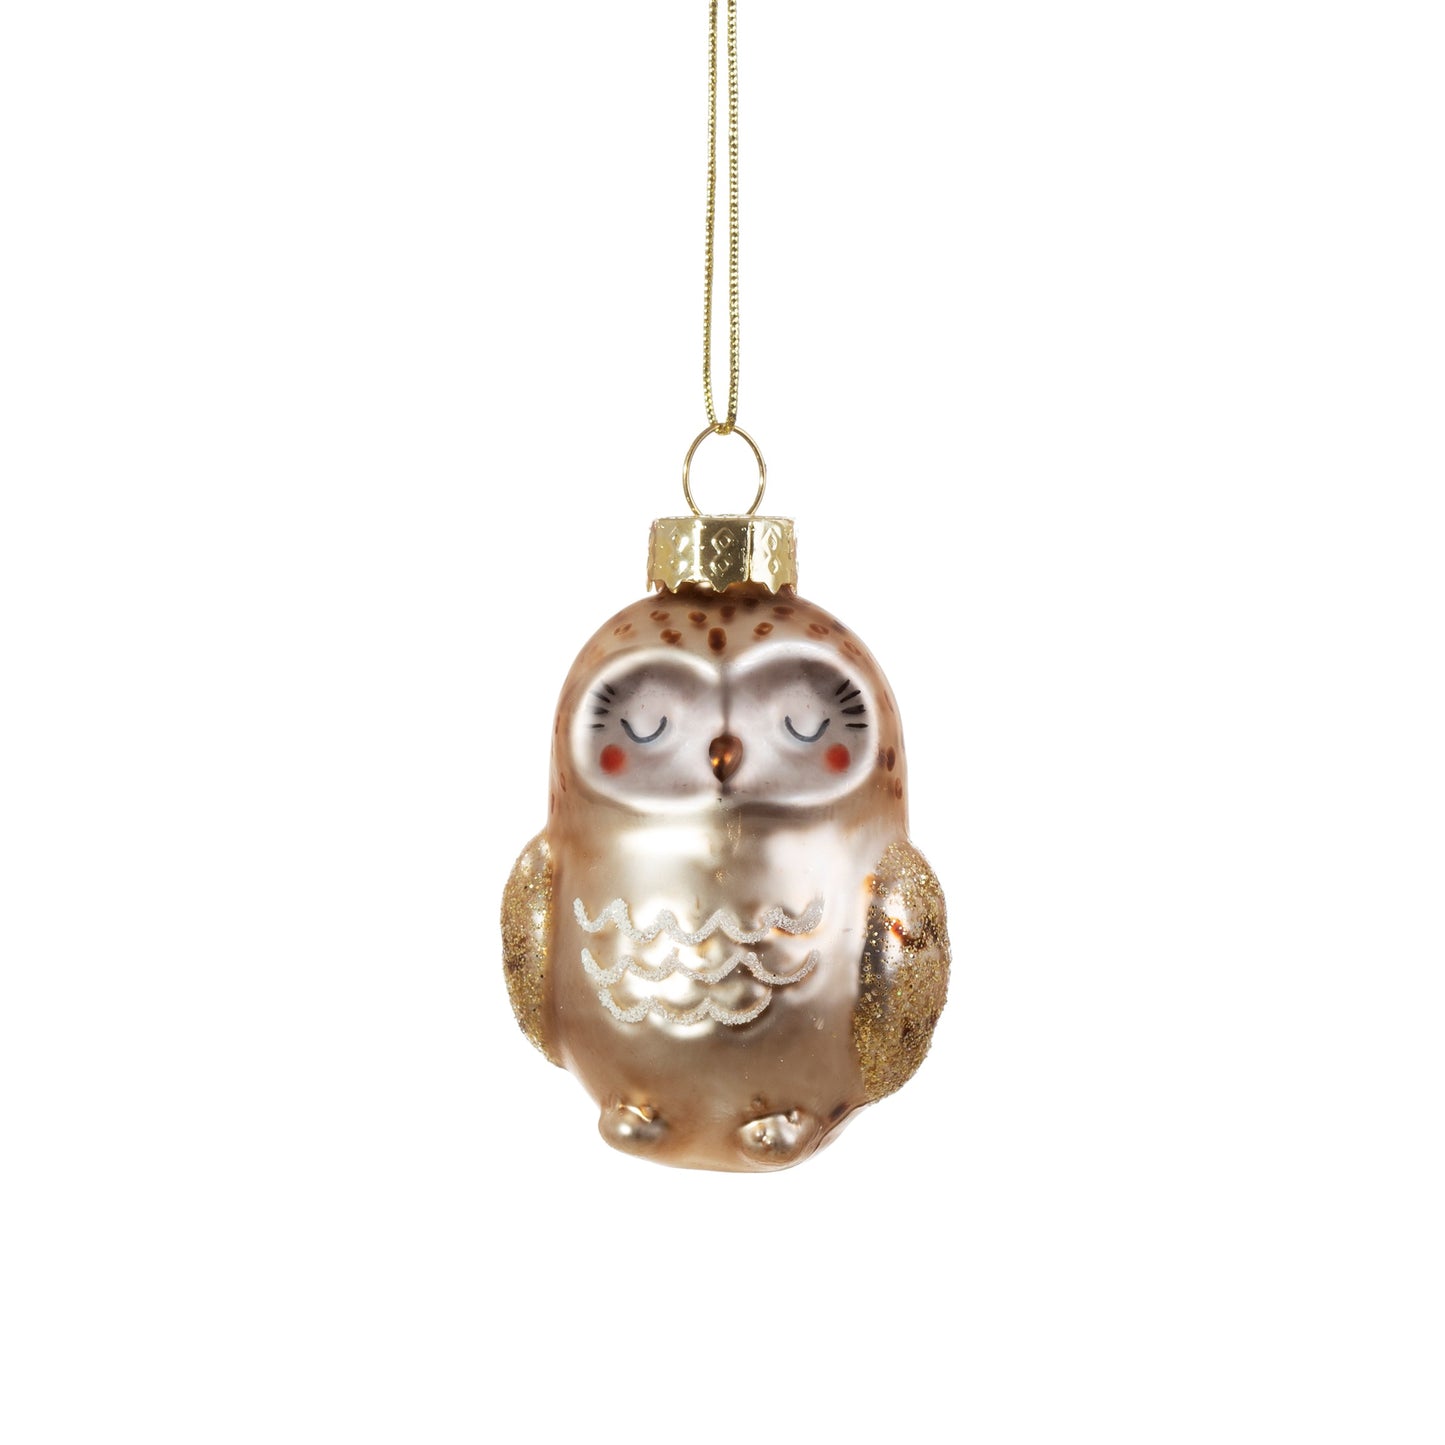 This extremely cute sleeping baby owl glass Christmas decoration will definitely melt some hearts this festive season! How about creating a magical woodland theme this year?